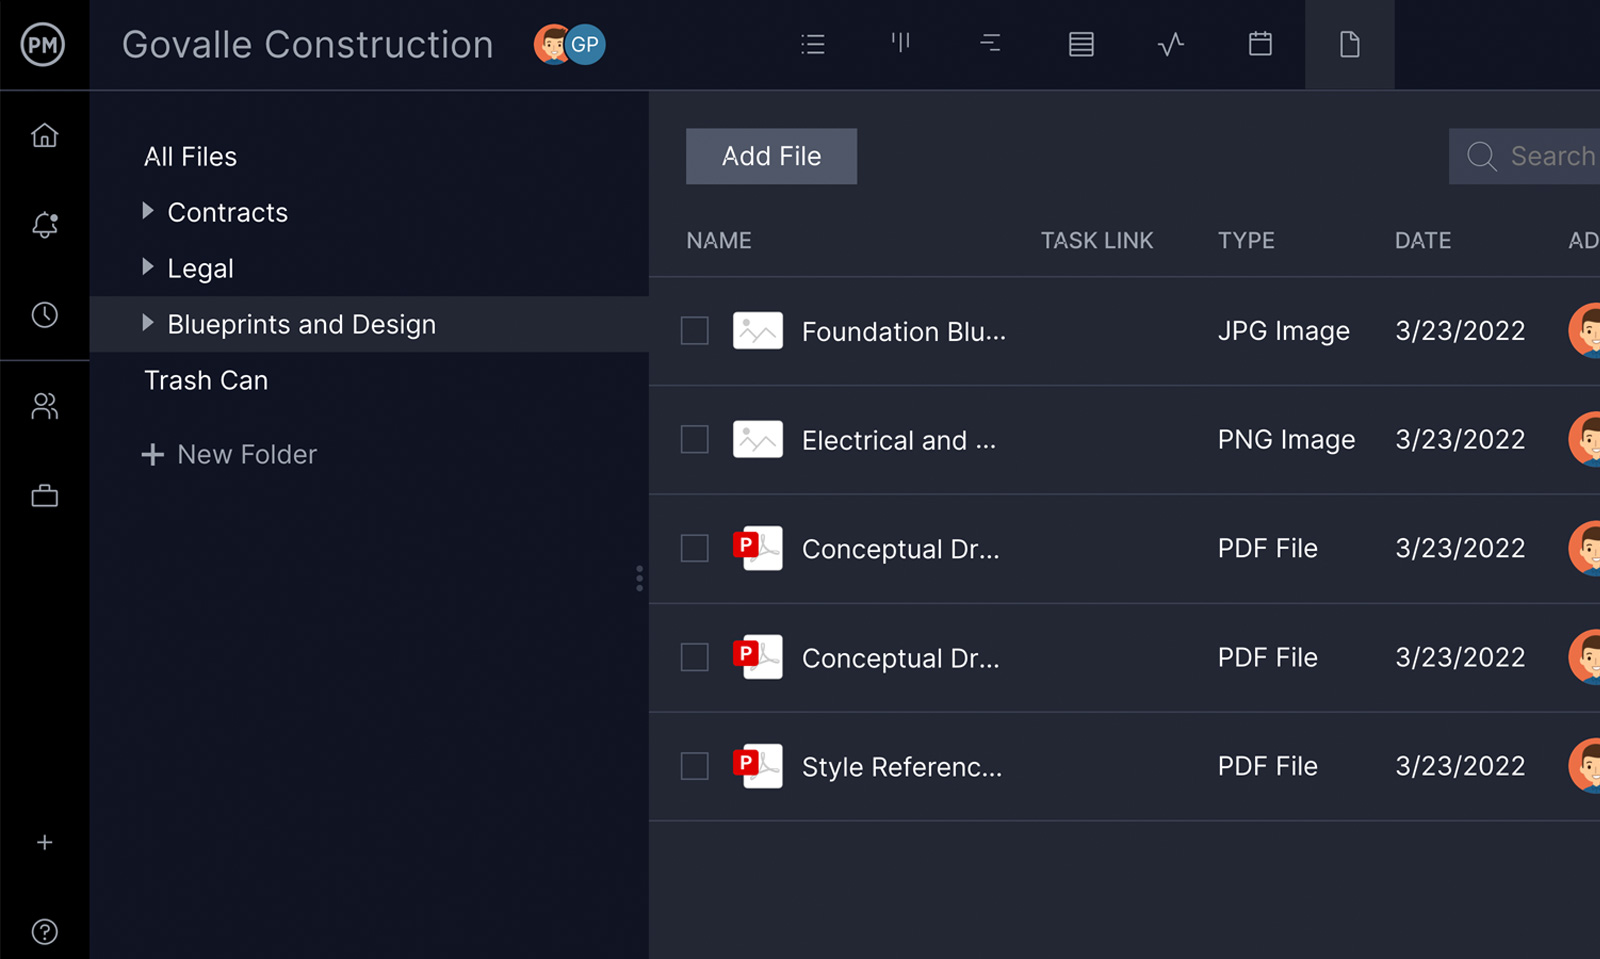 ProjectManager's file manager dashboard is ideal for marketing teams